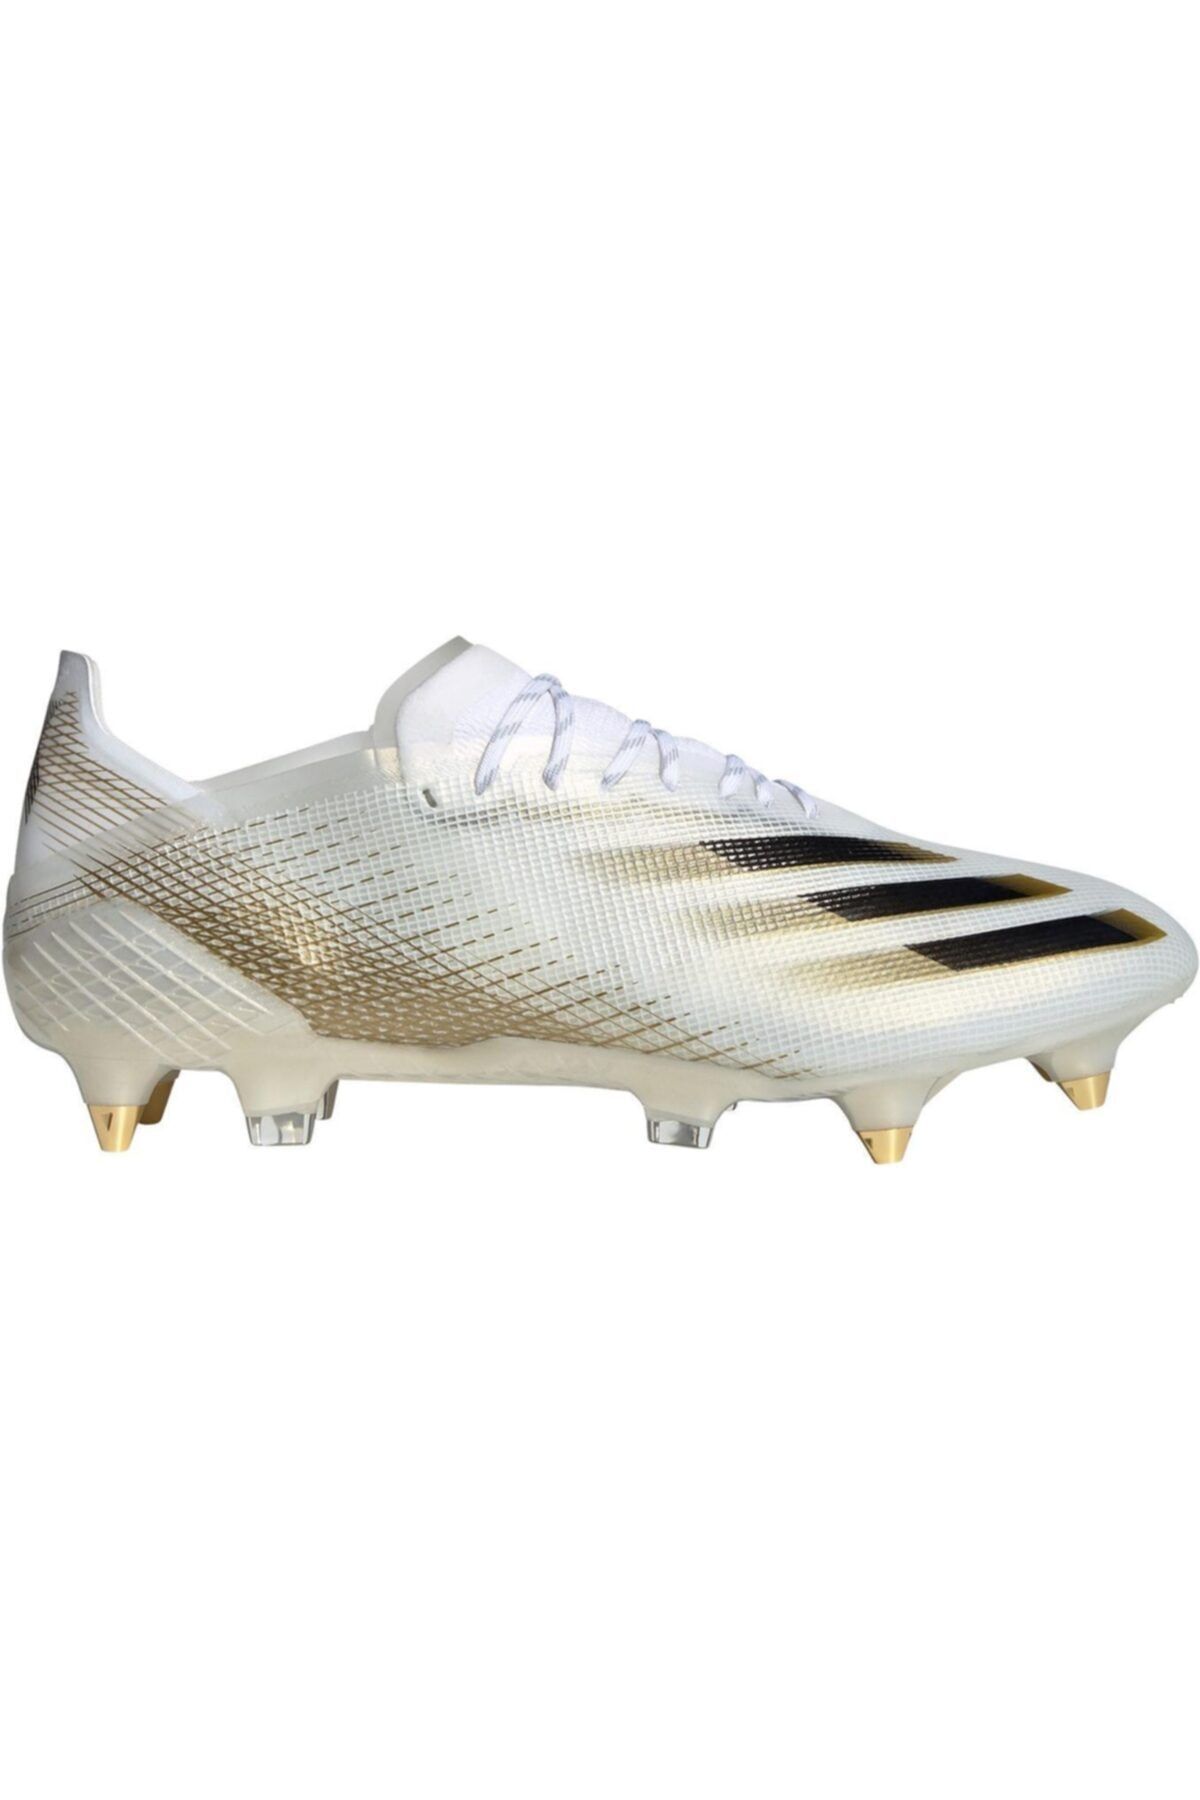 adidas X Ghosted.1 Soft Ground Boots